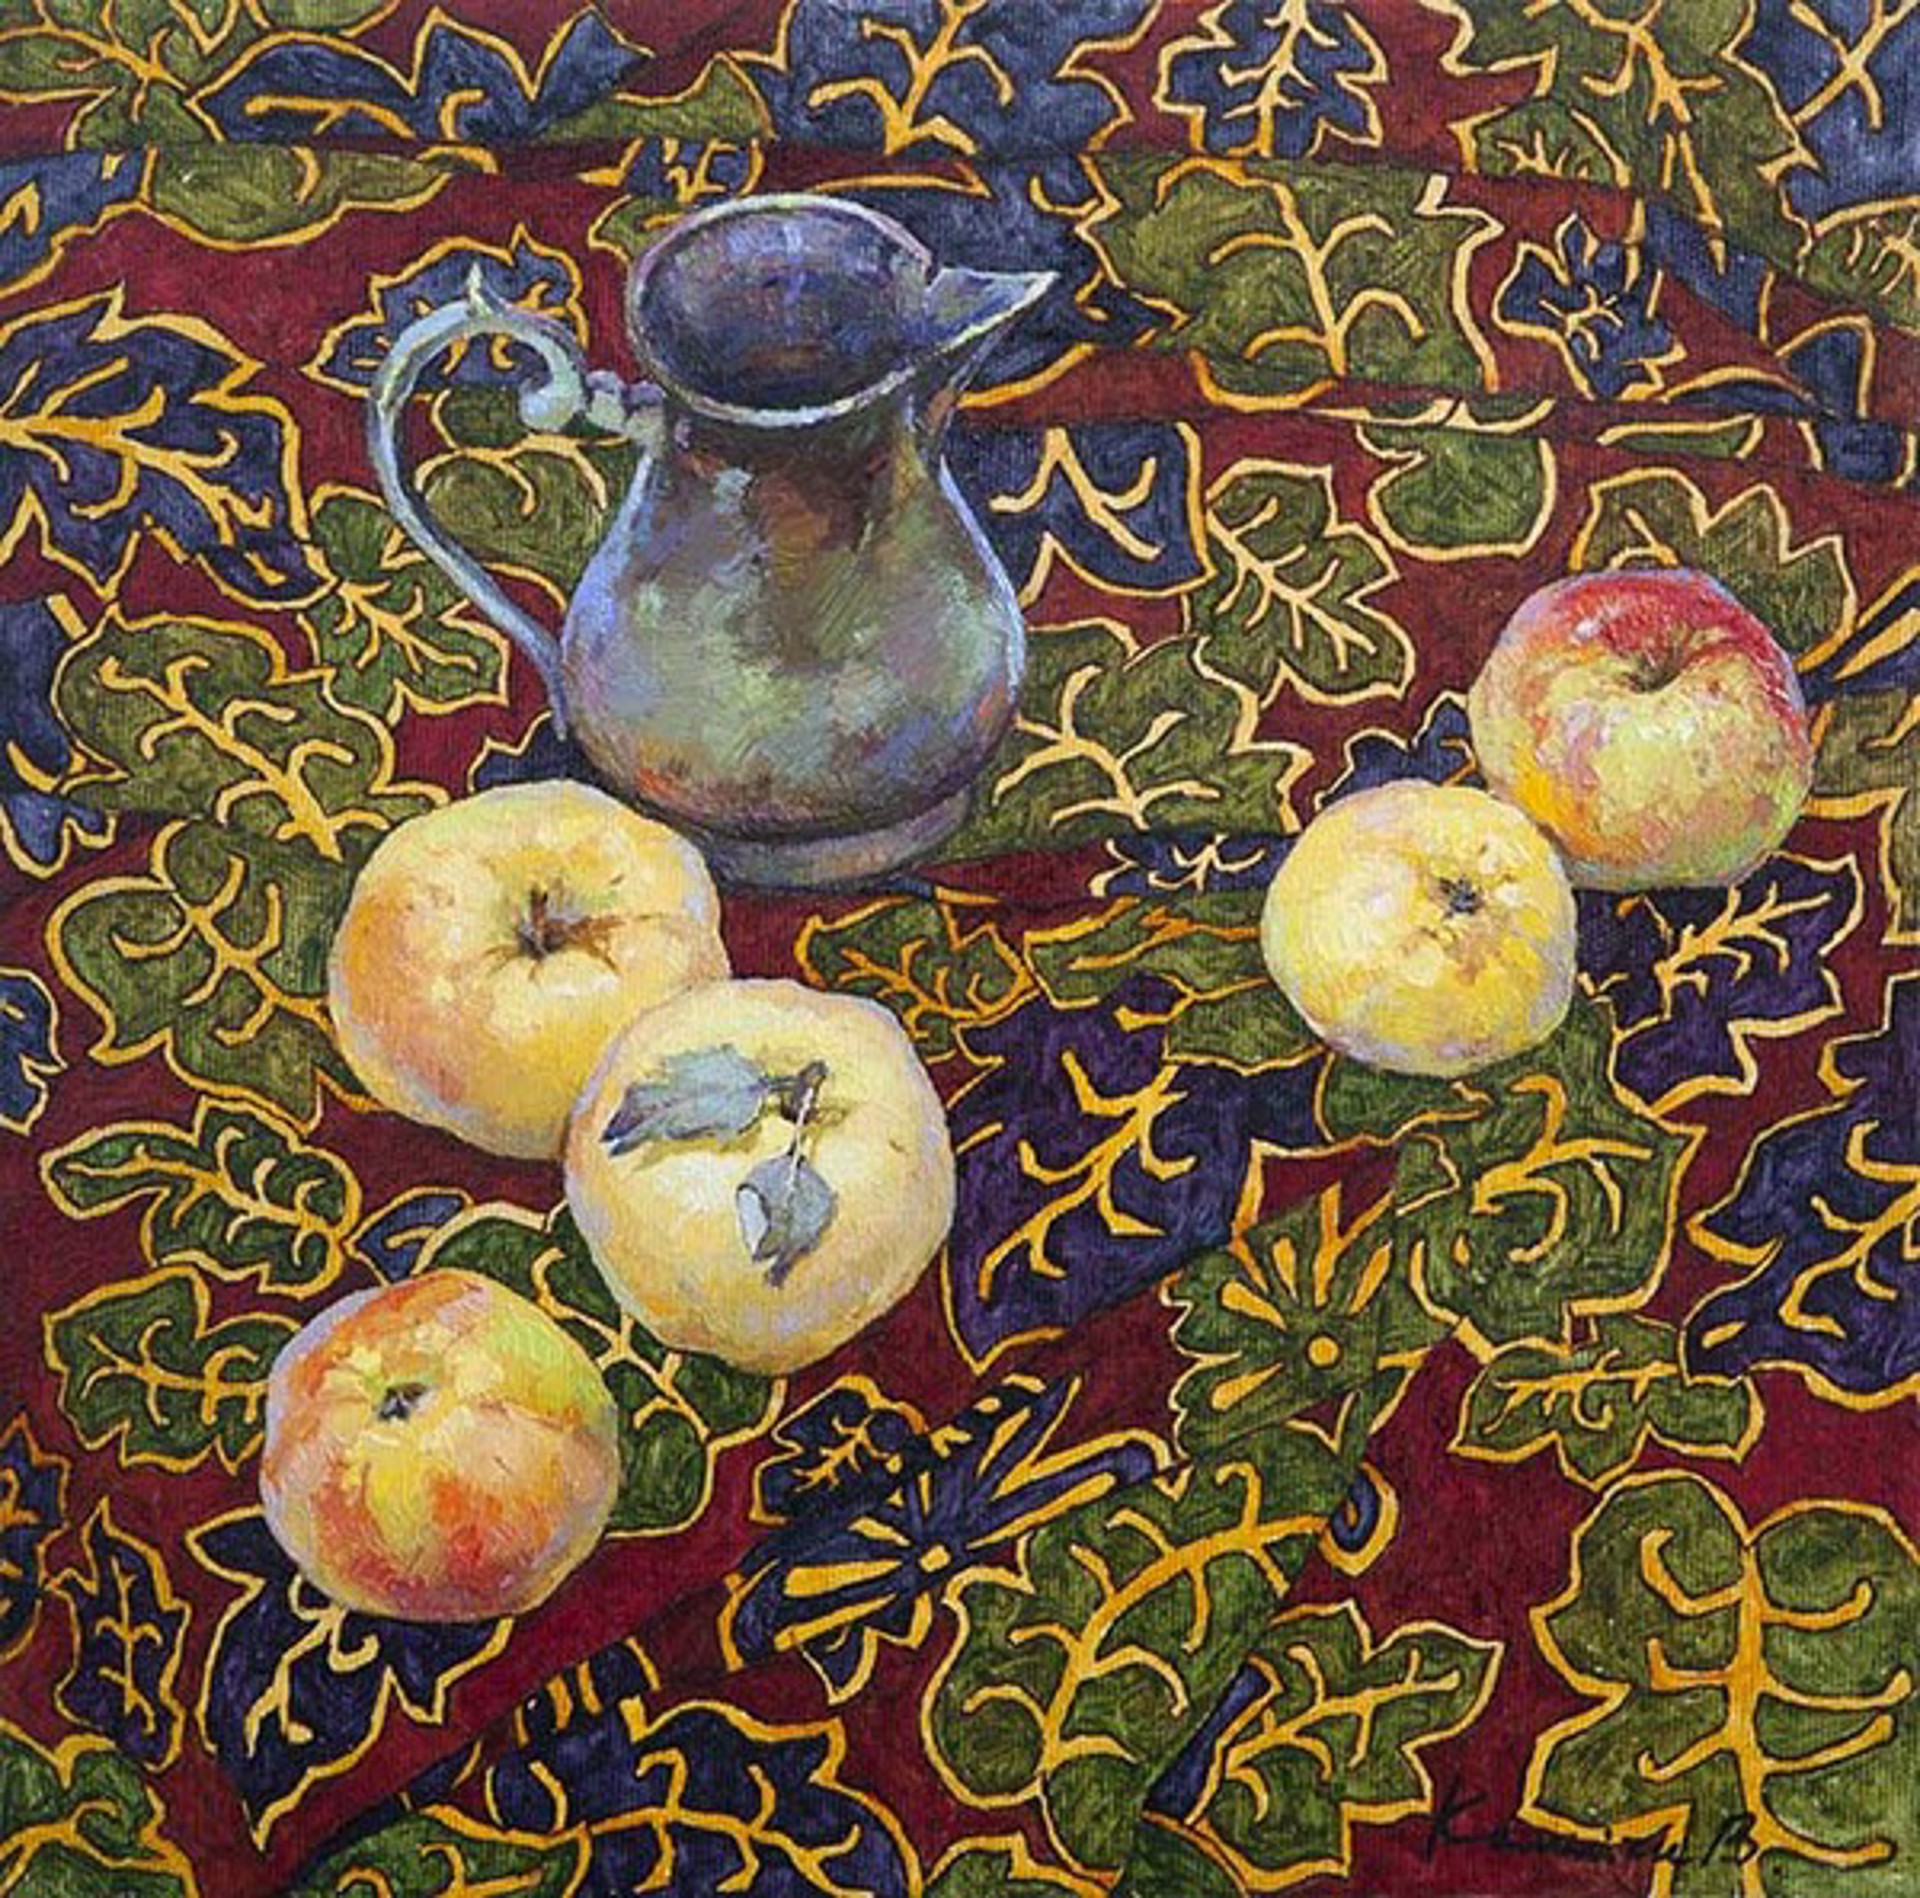 Apples on the Leaves by Victoria Kalaichi